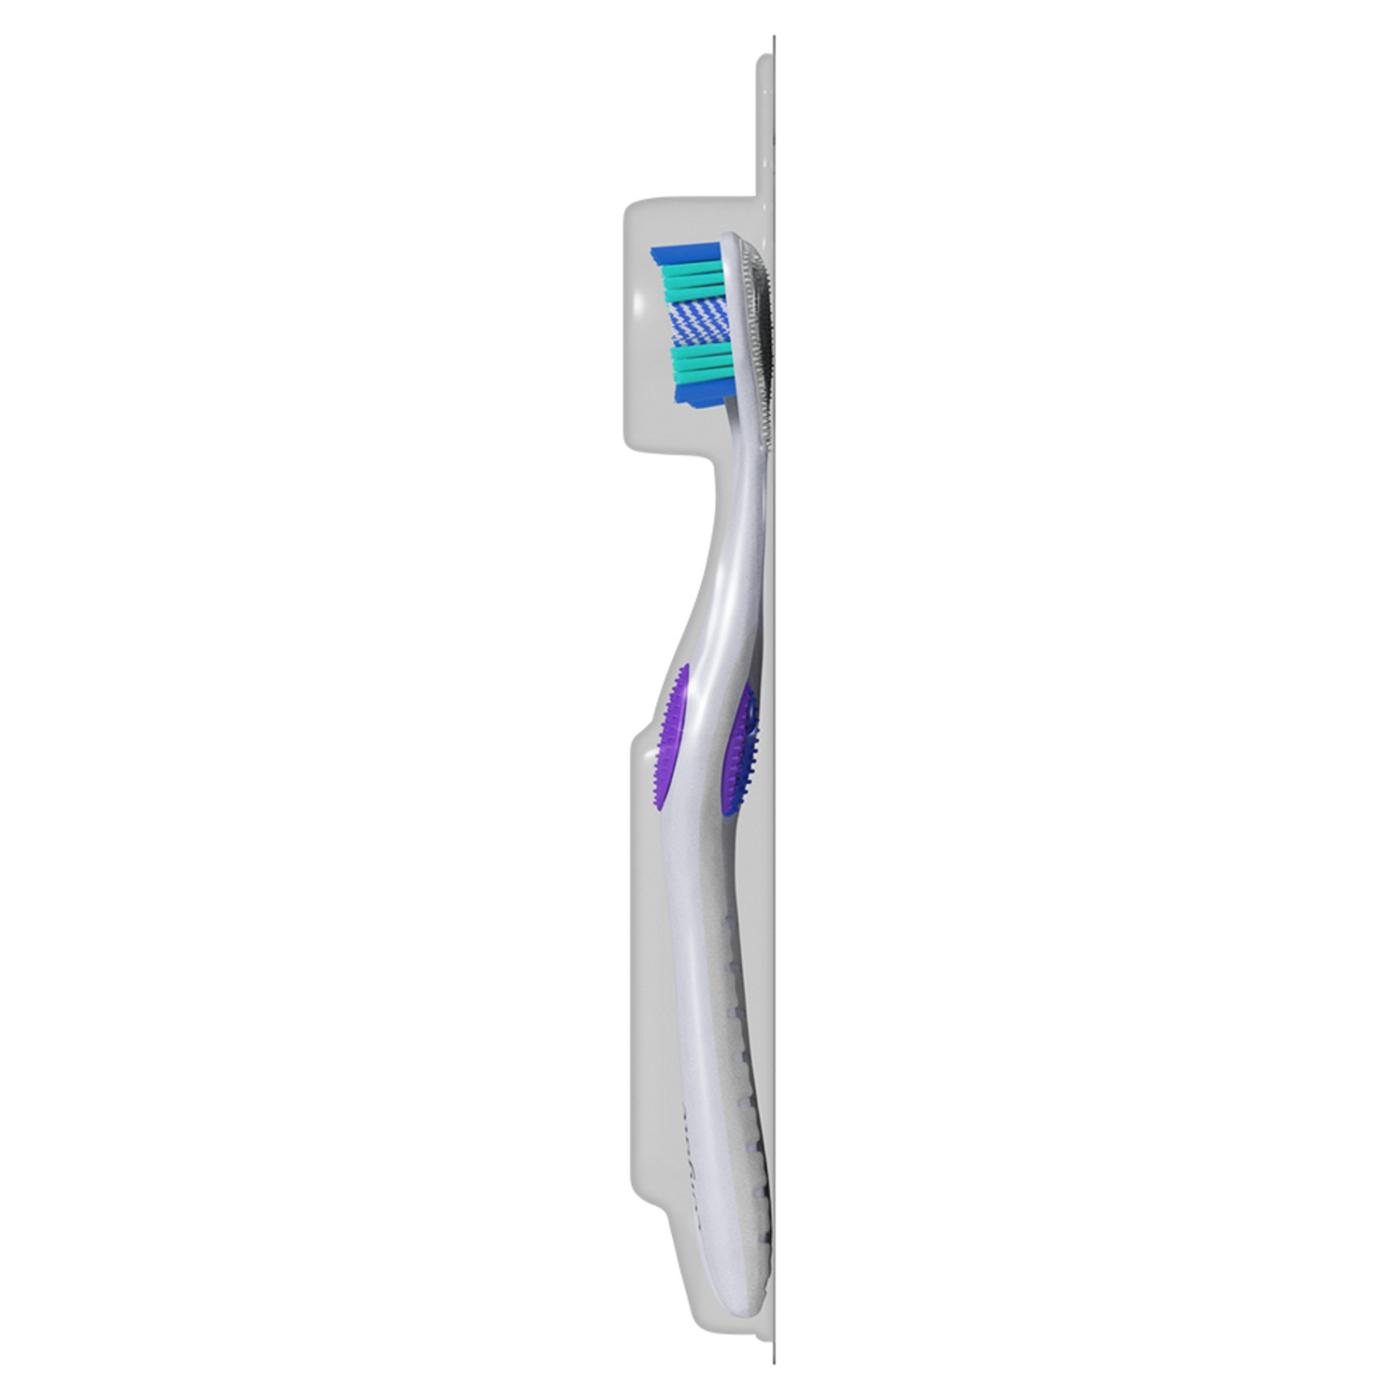 Colgate 360 Optic White Toothbrushes - Soft; image 6 of 11